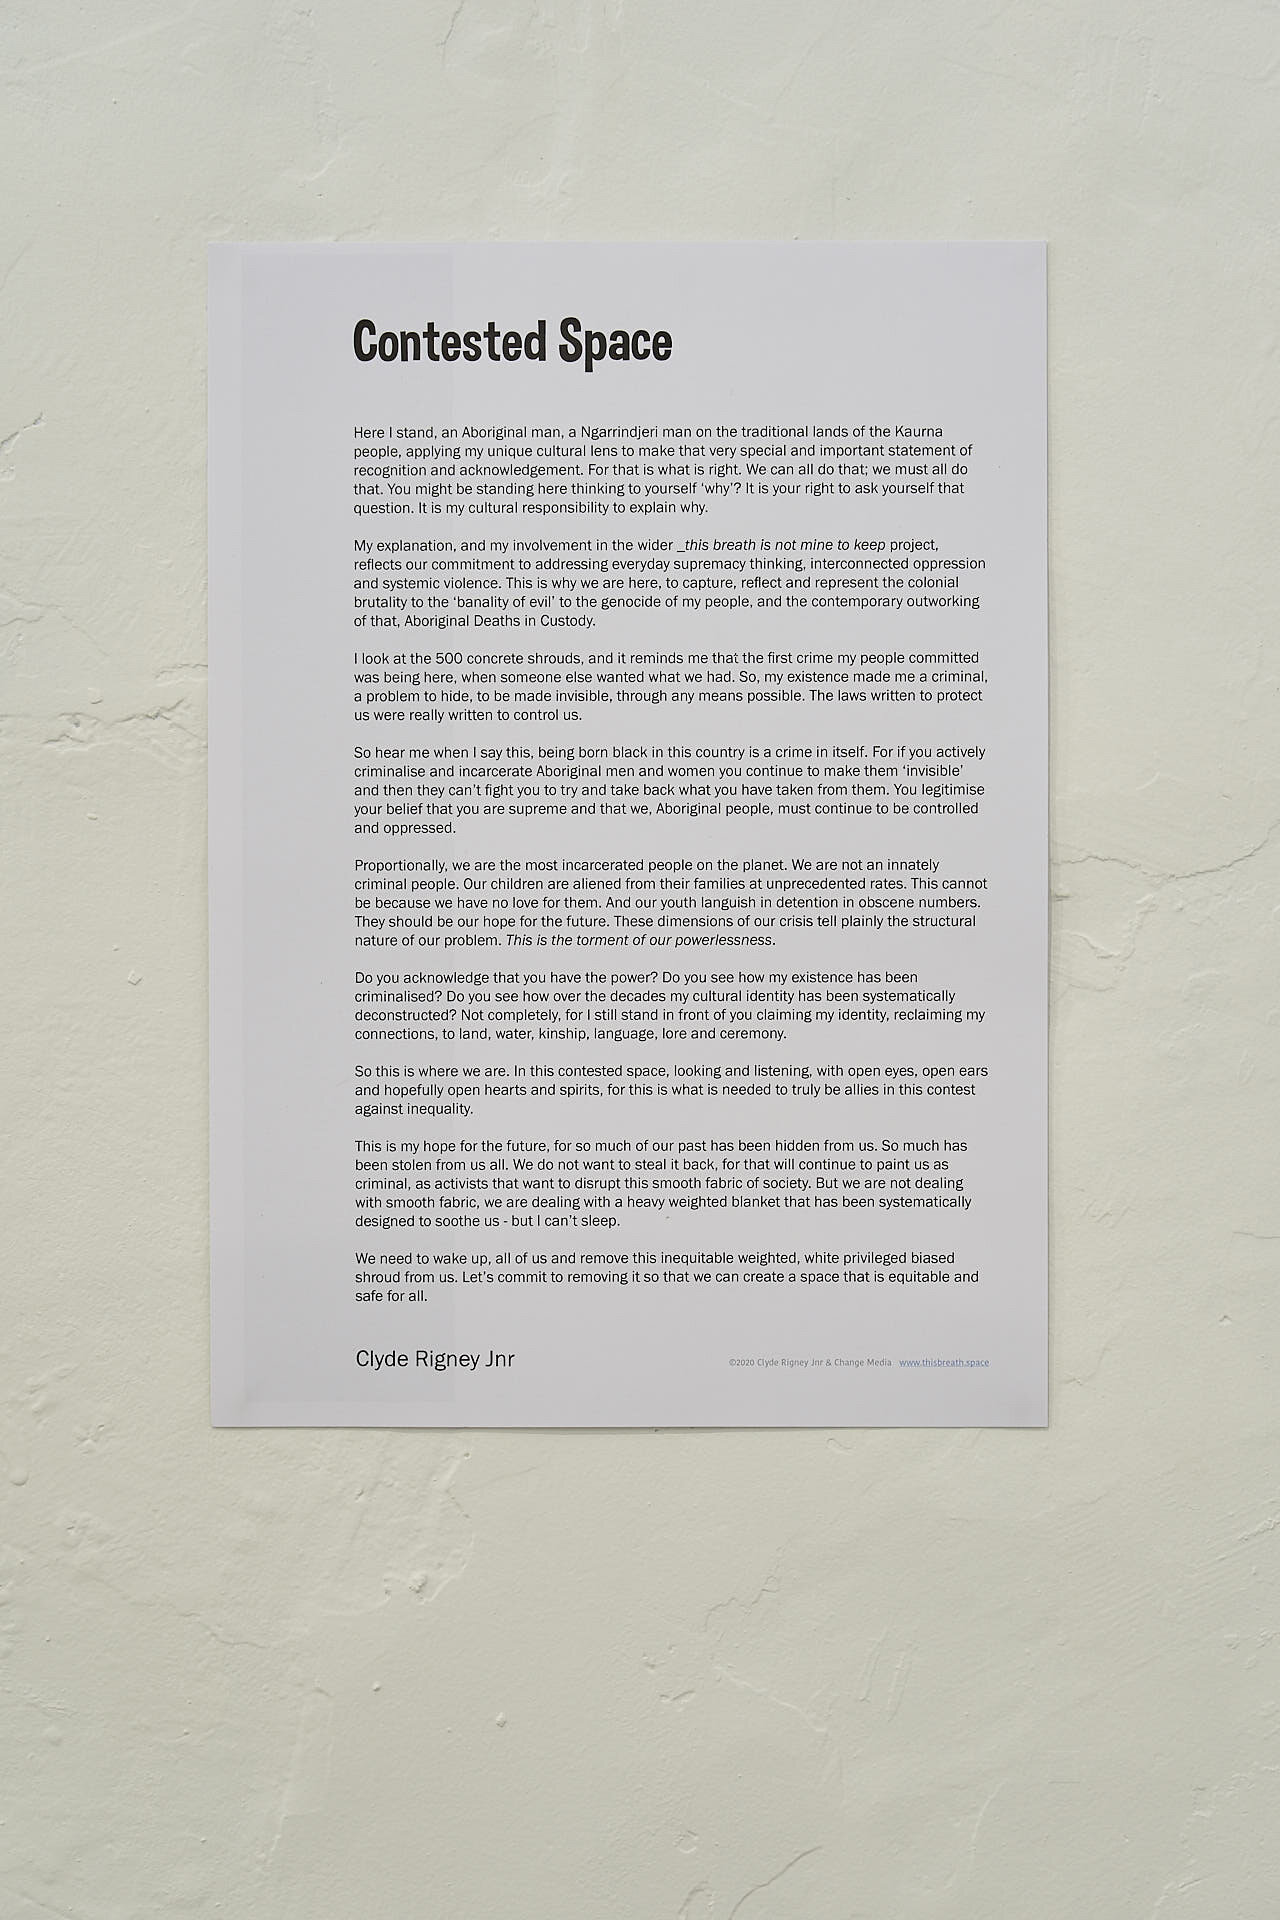 Contested Space - essay (Clyde Rigney Jnr)